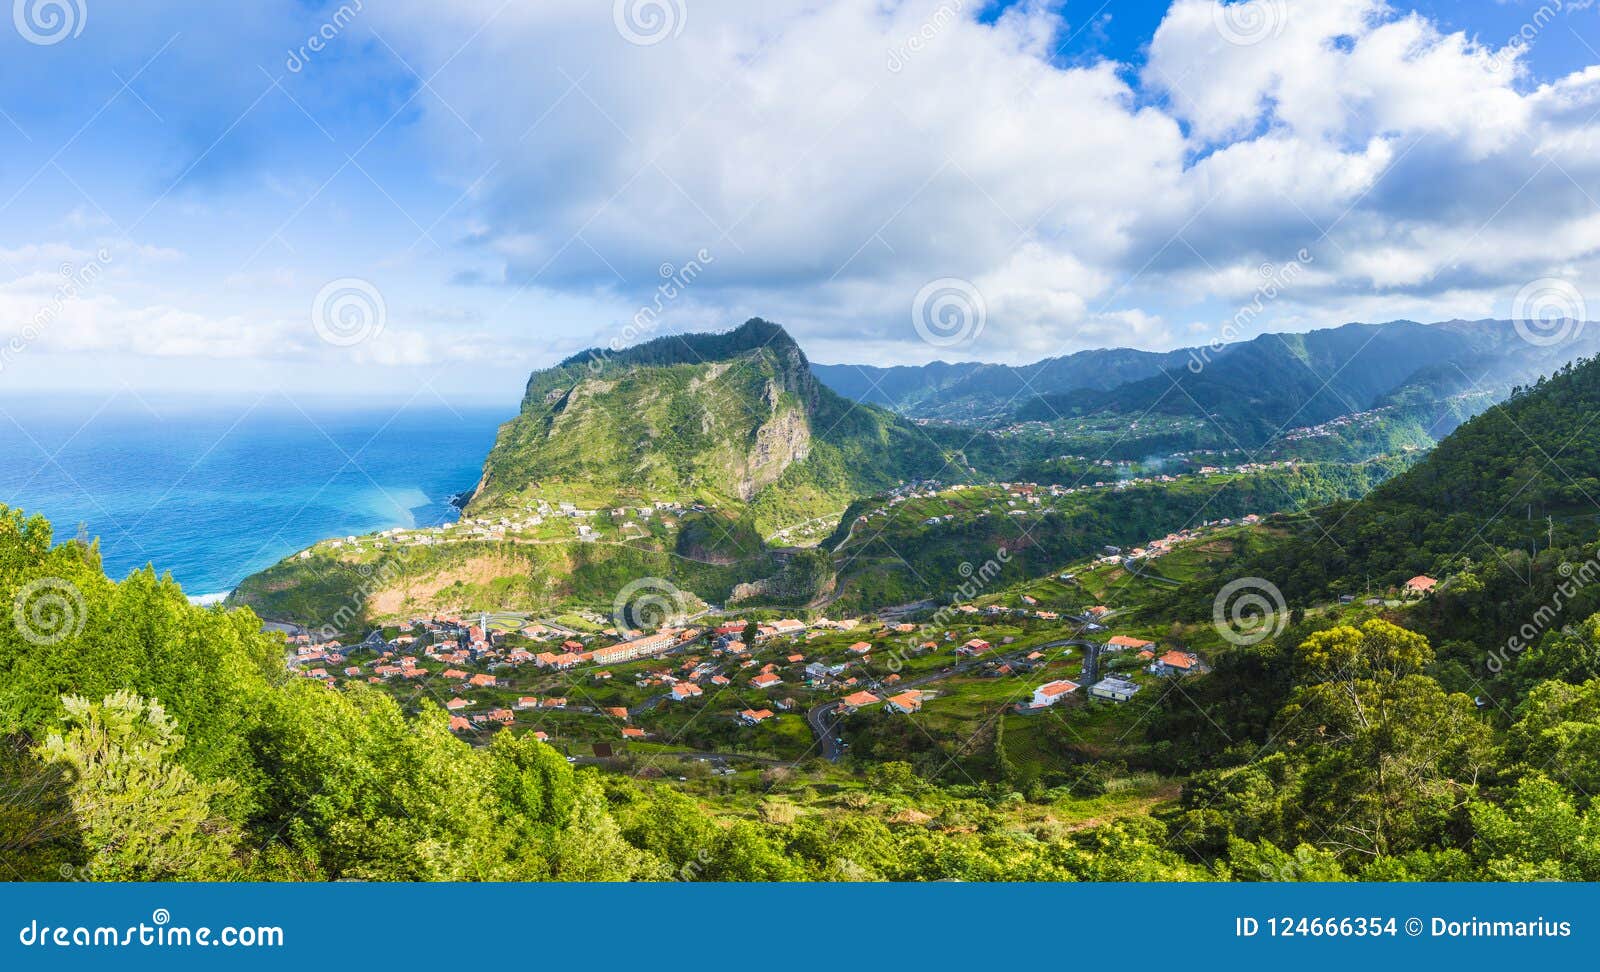 view of faial village and eagle rock, madeira island, portugal